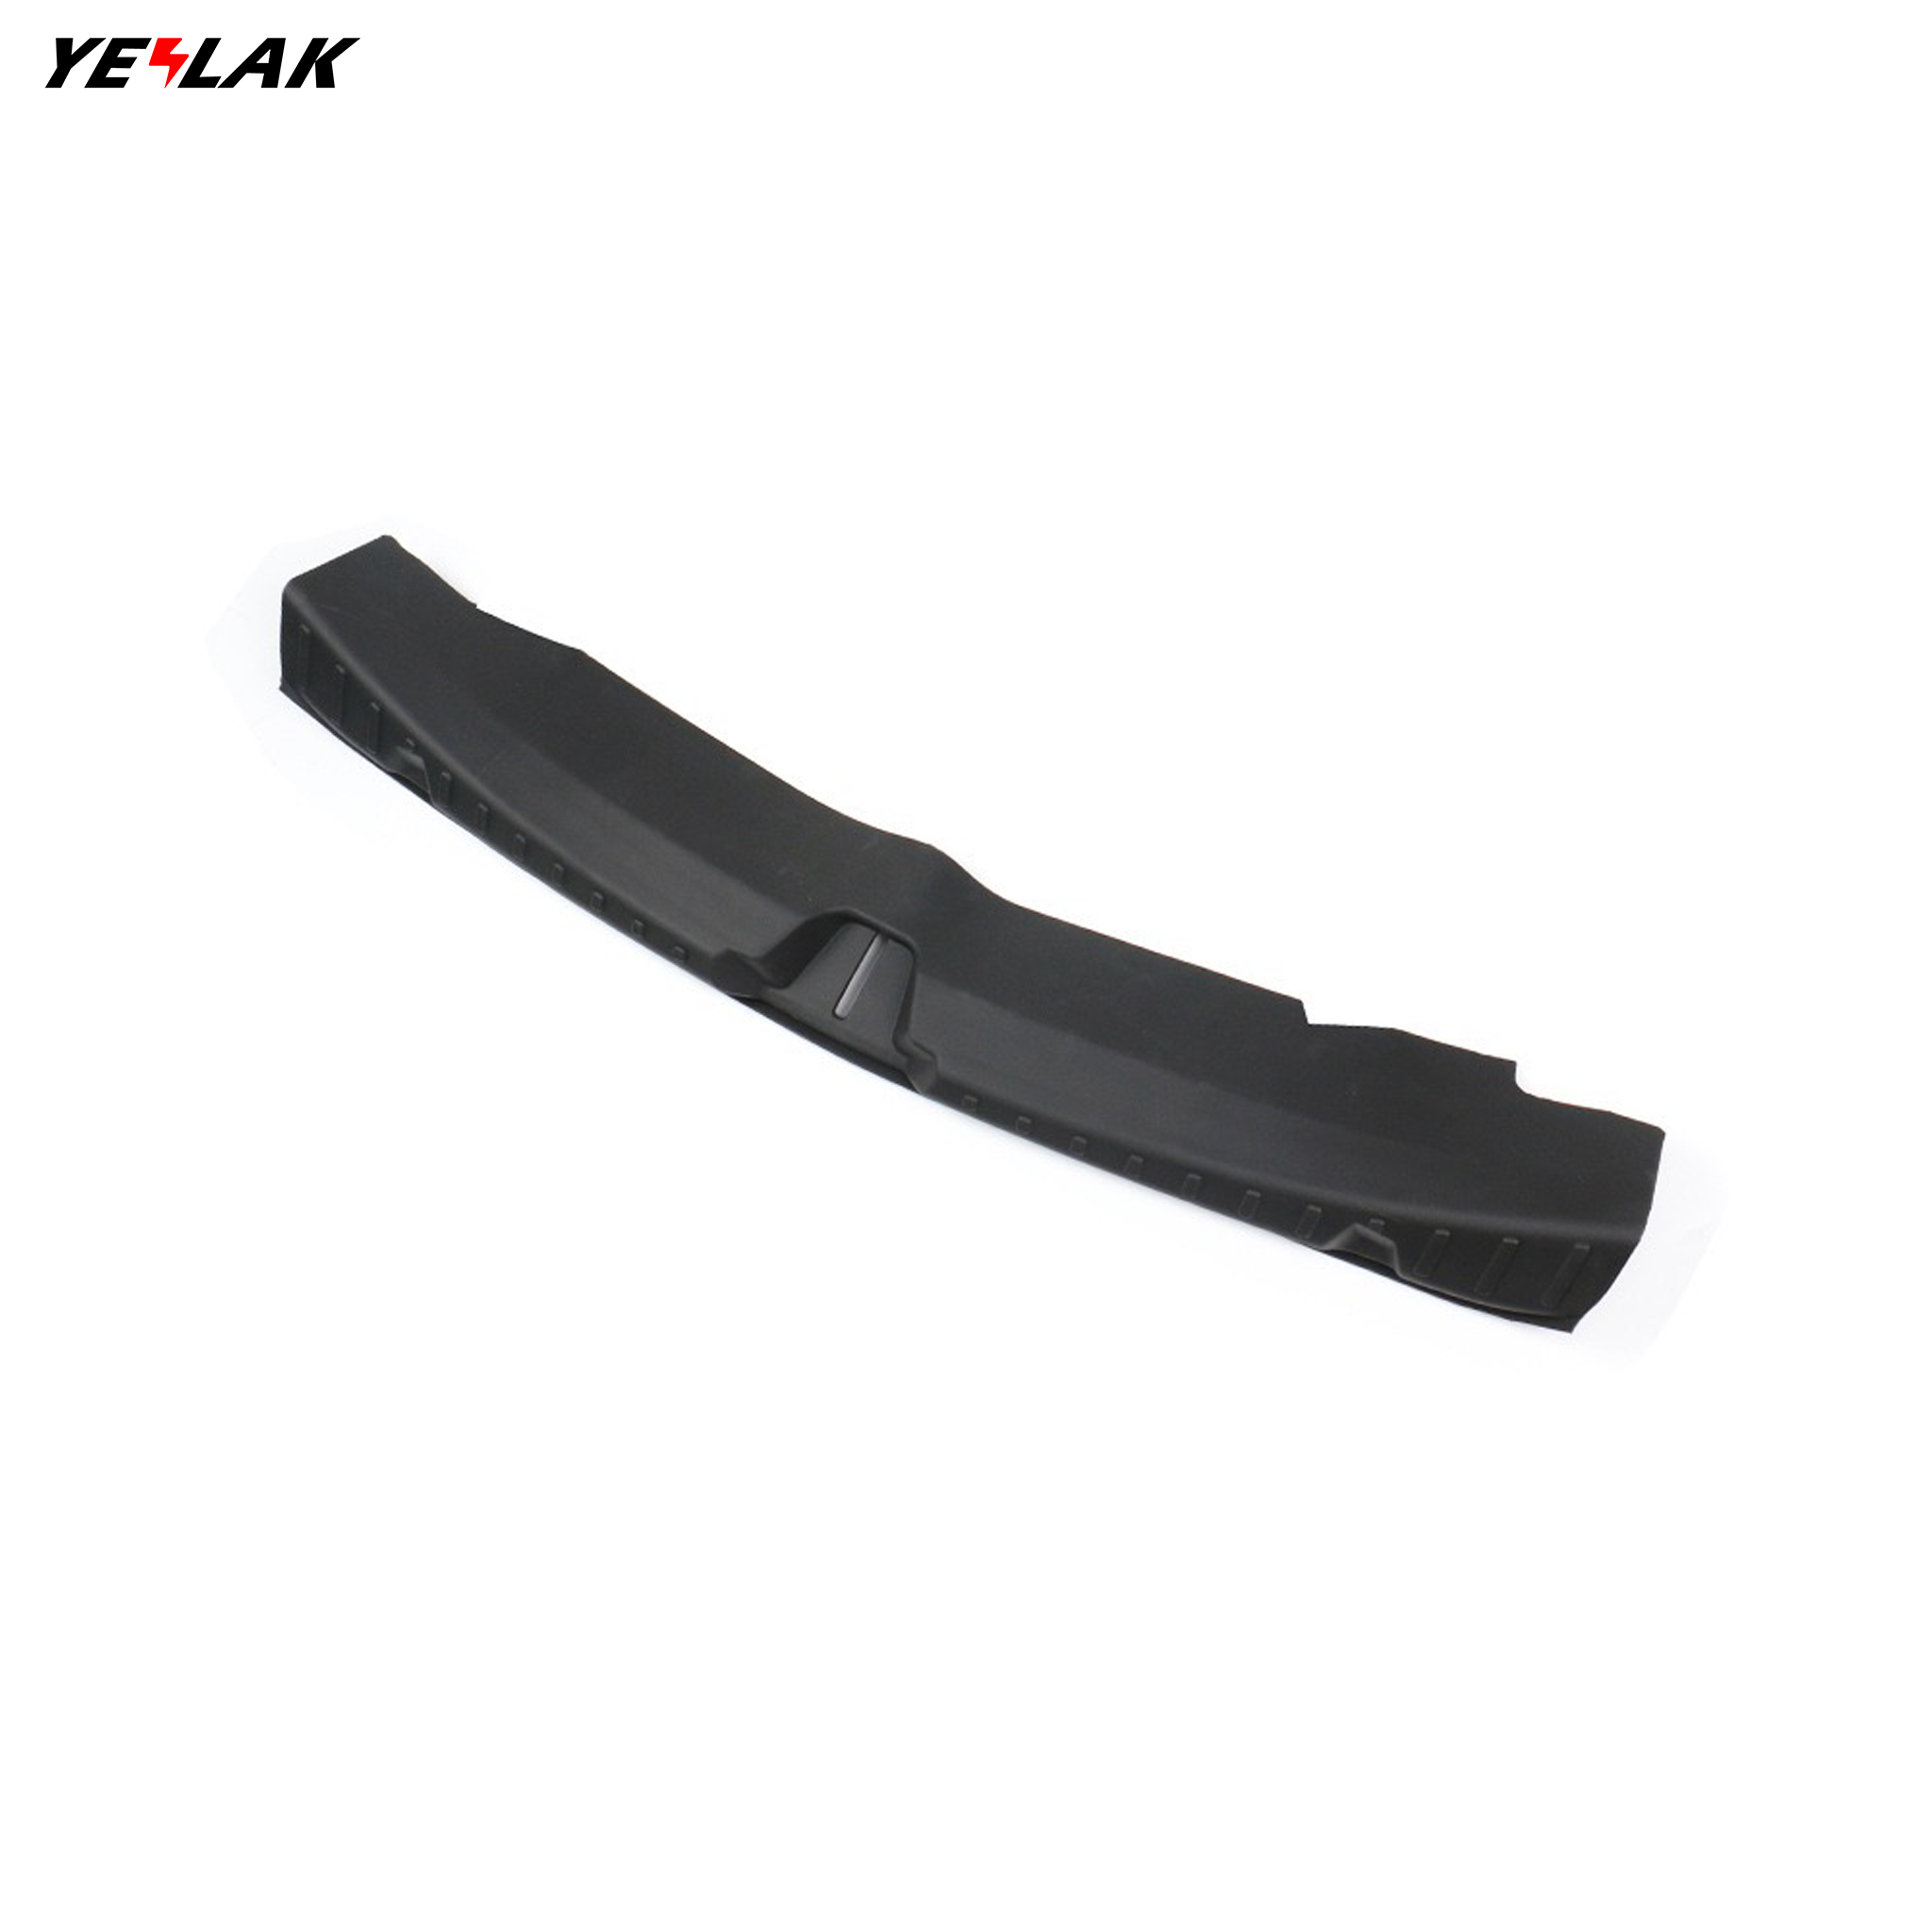 Trunk Sill Plate Protector for Tesla New Model 3 Highland